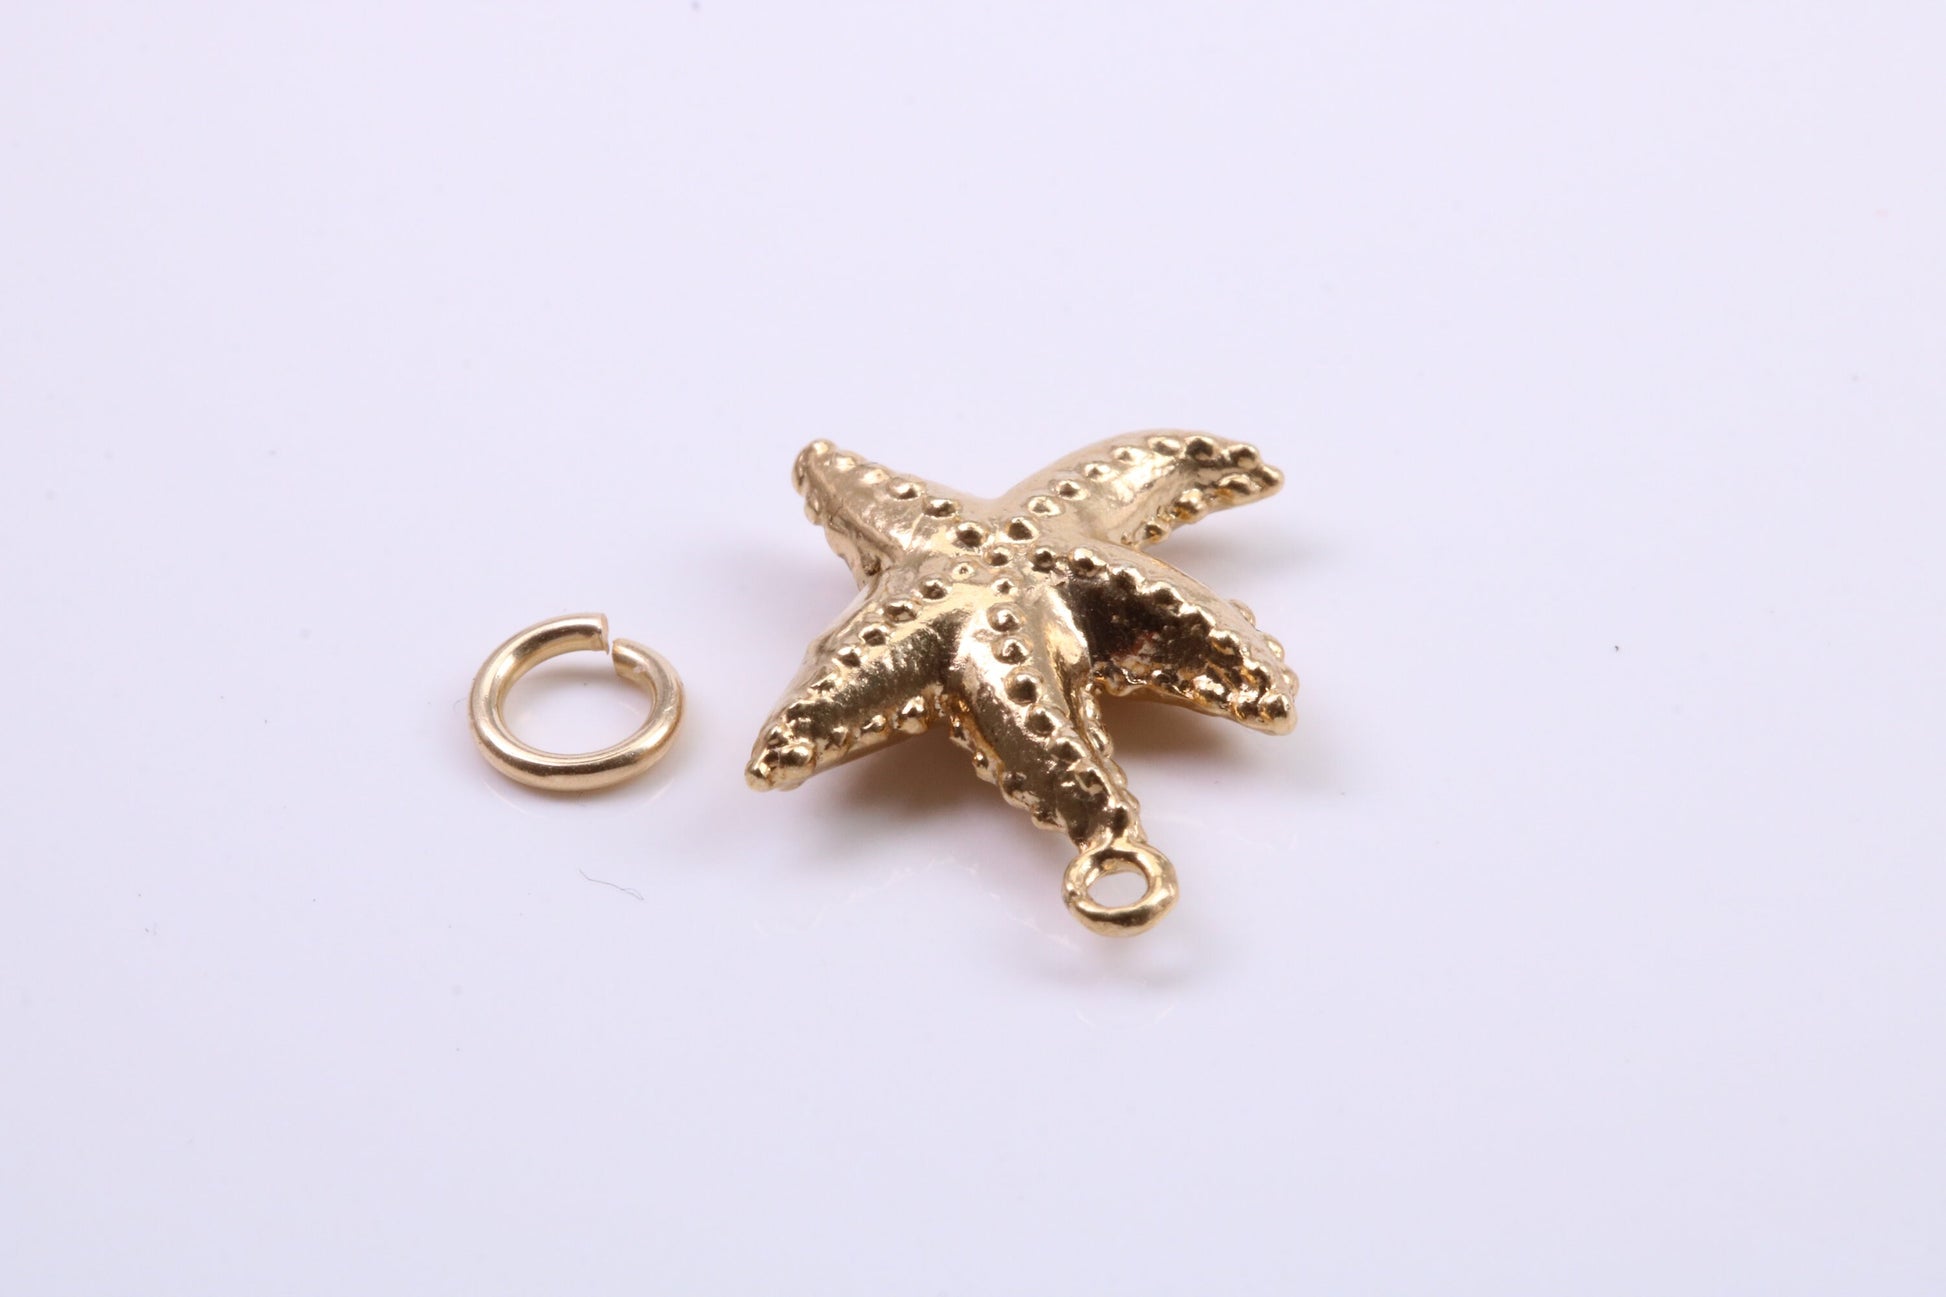 Star Fish Charm, Traditional Charm, Made from Solid 9ct Yellow Gold, British Hallmarked, Complete with Attachment Link